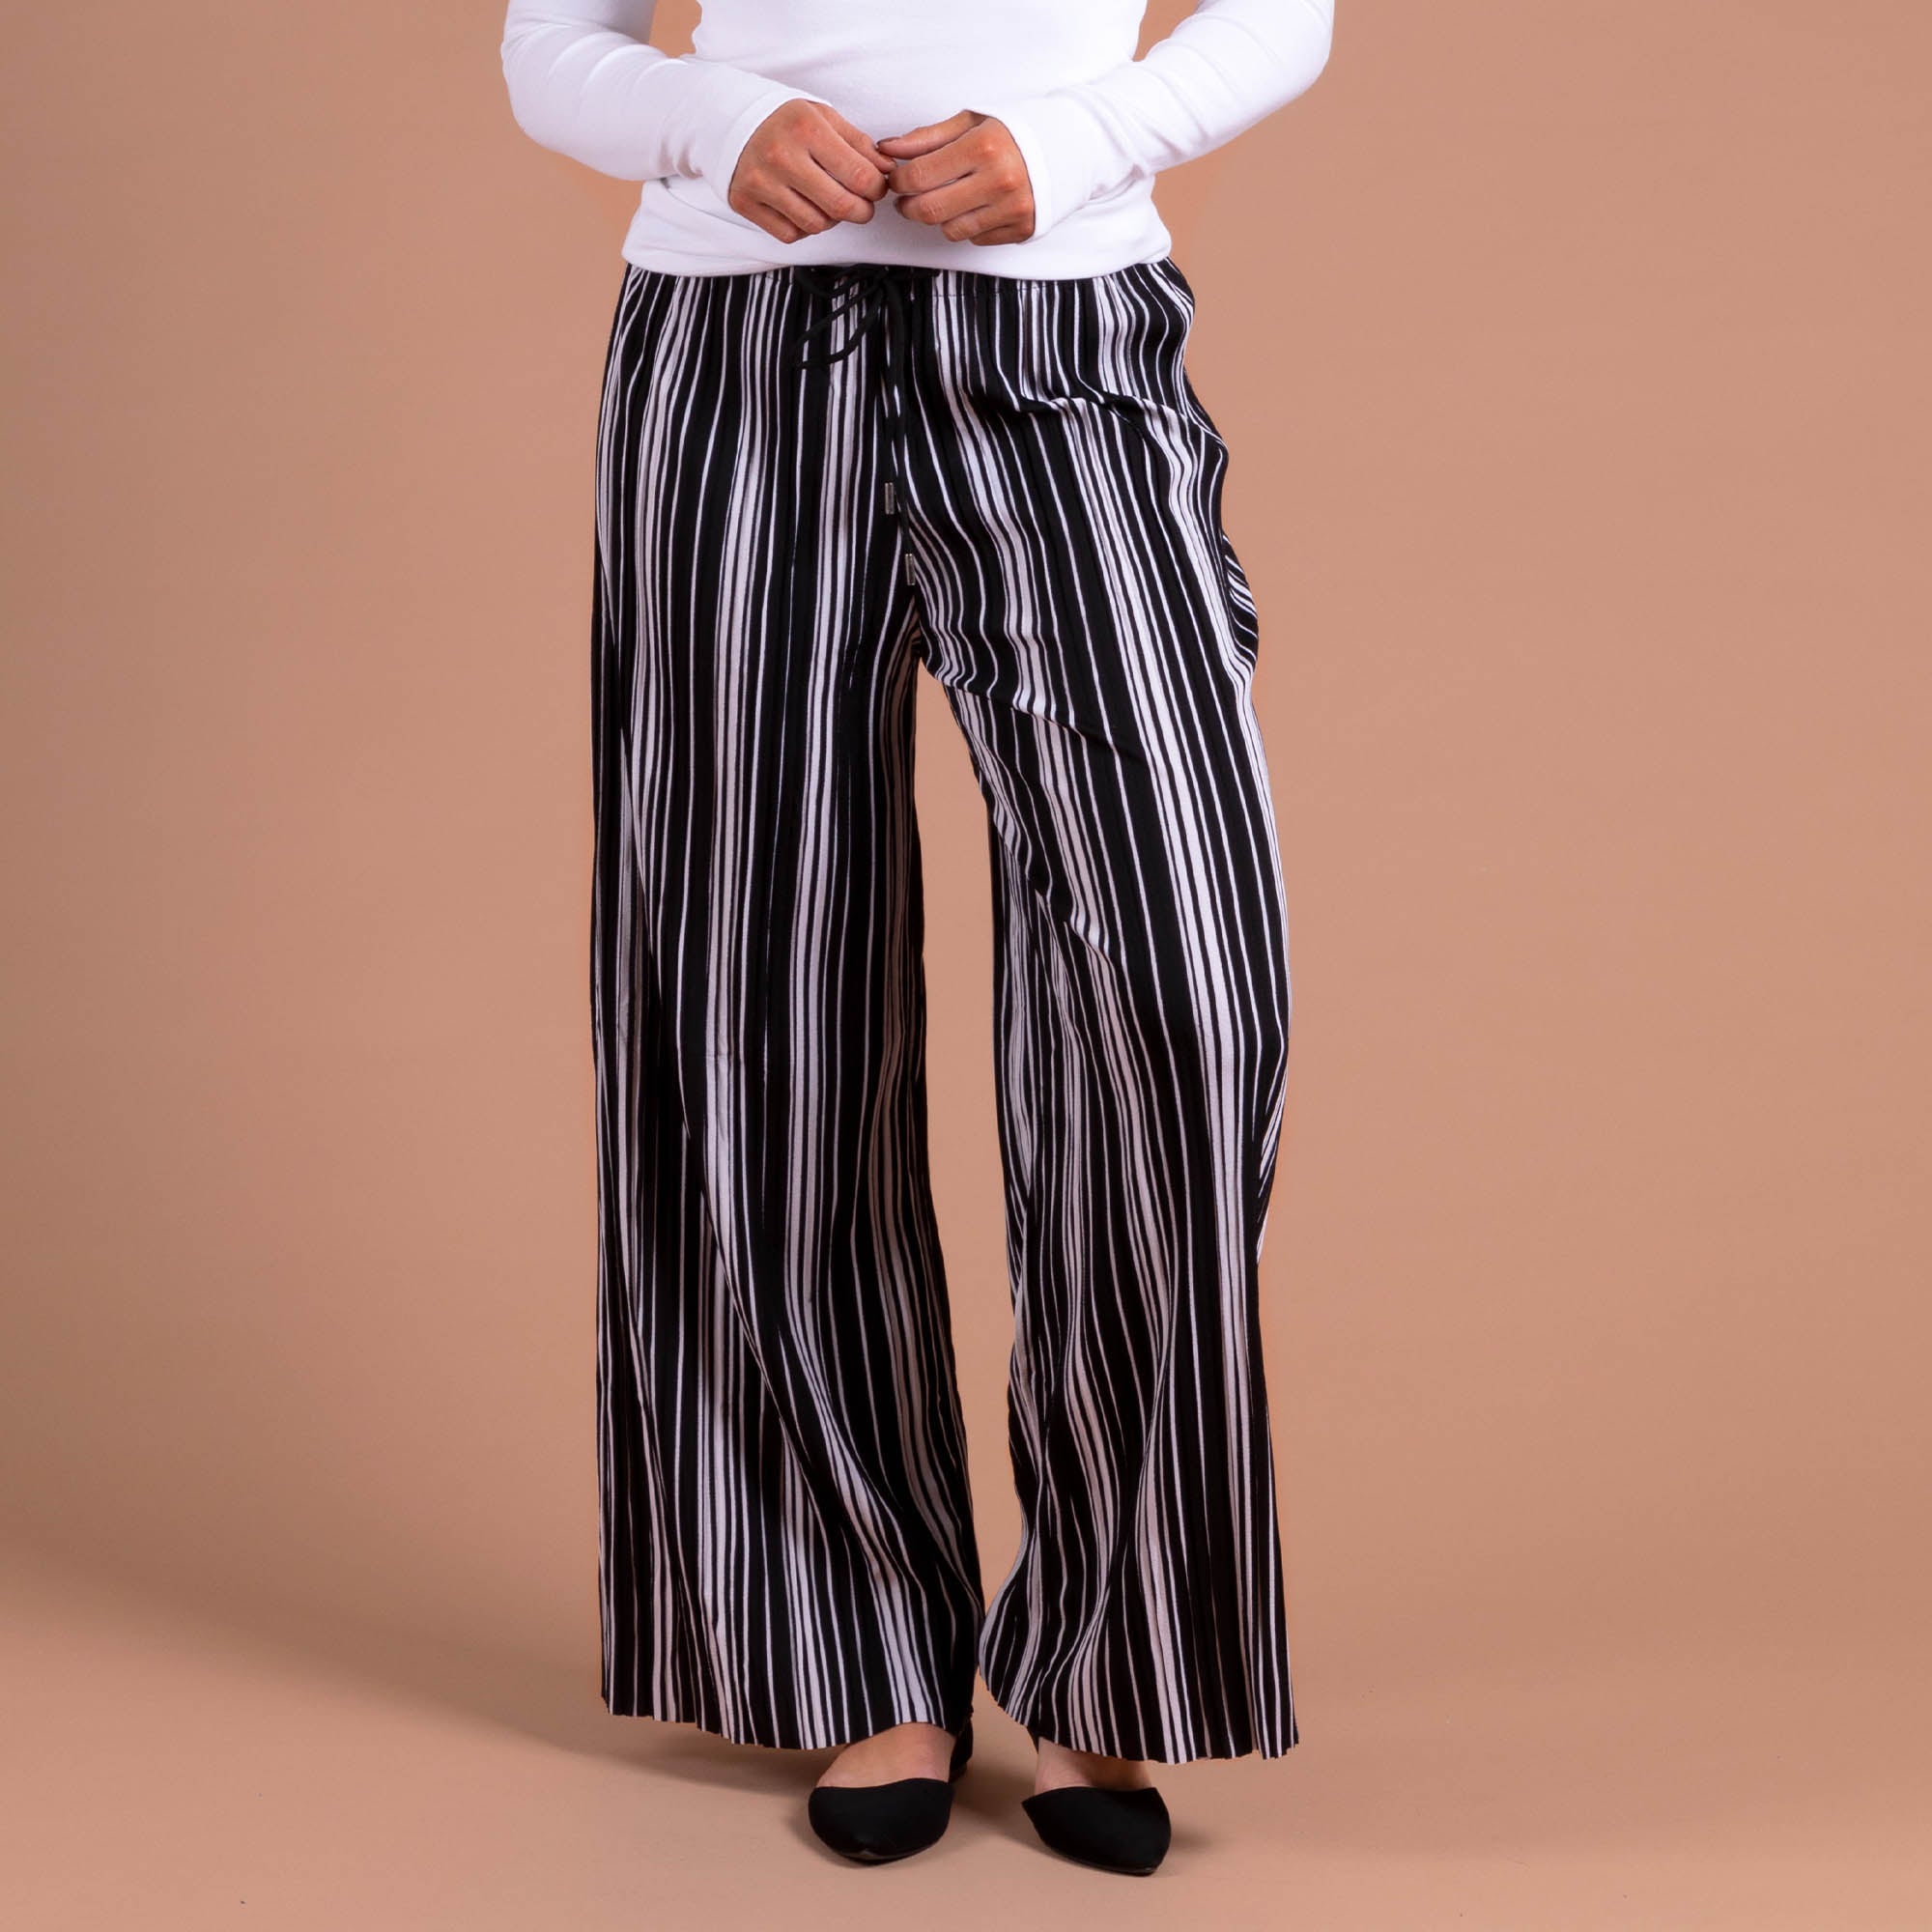 Striped Pleated Palazzo Wide Leg Pants - Black & White - One Size Fits Most